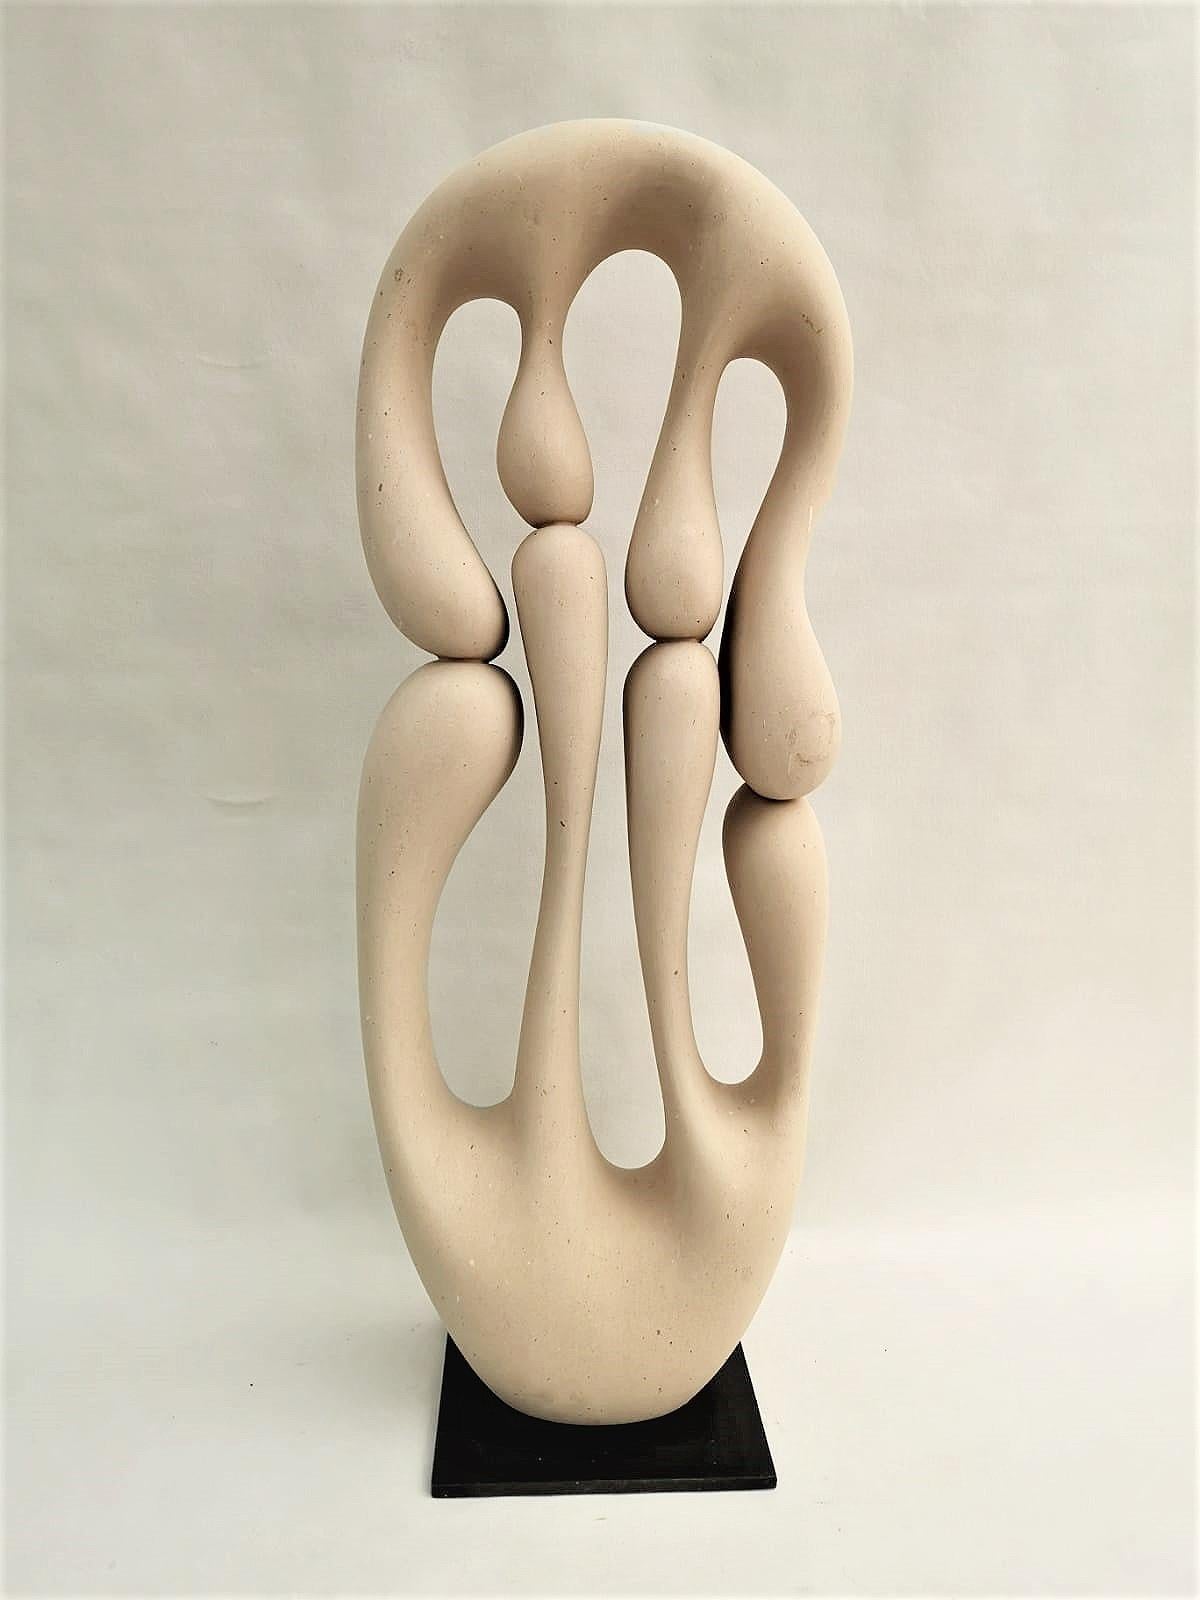 21st century abstract sculpture MELTED by Renzo Buttazzo from Italy.

Sculpture in Lecce Stone.
Delivered with a certificate of authenticity.

Since 1886 Renzo Buttazzo work with Pietra Leccese (limestone from Lecce), and during this time he